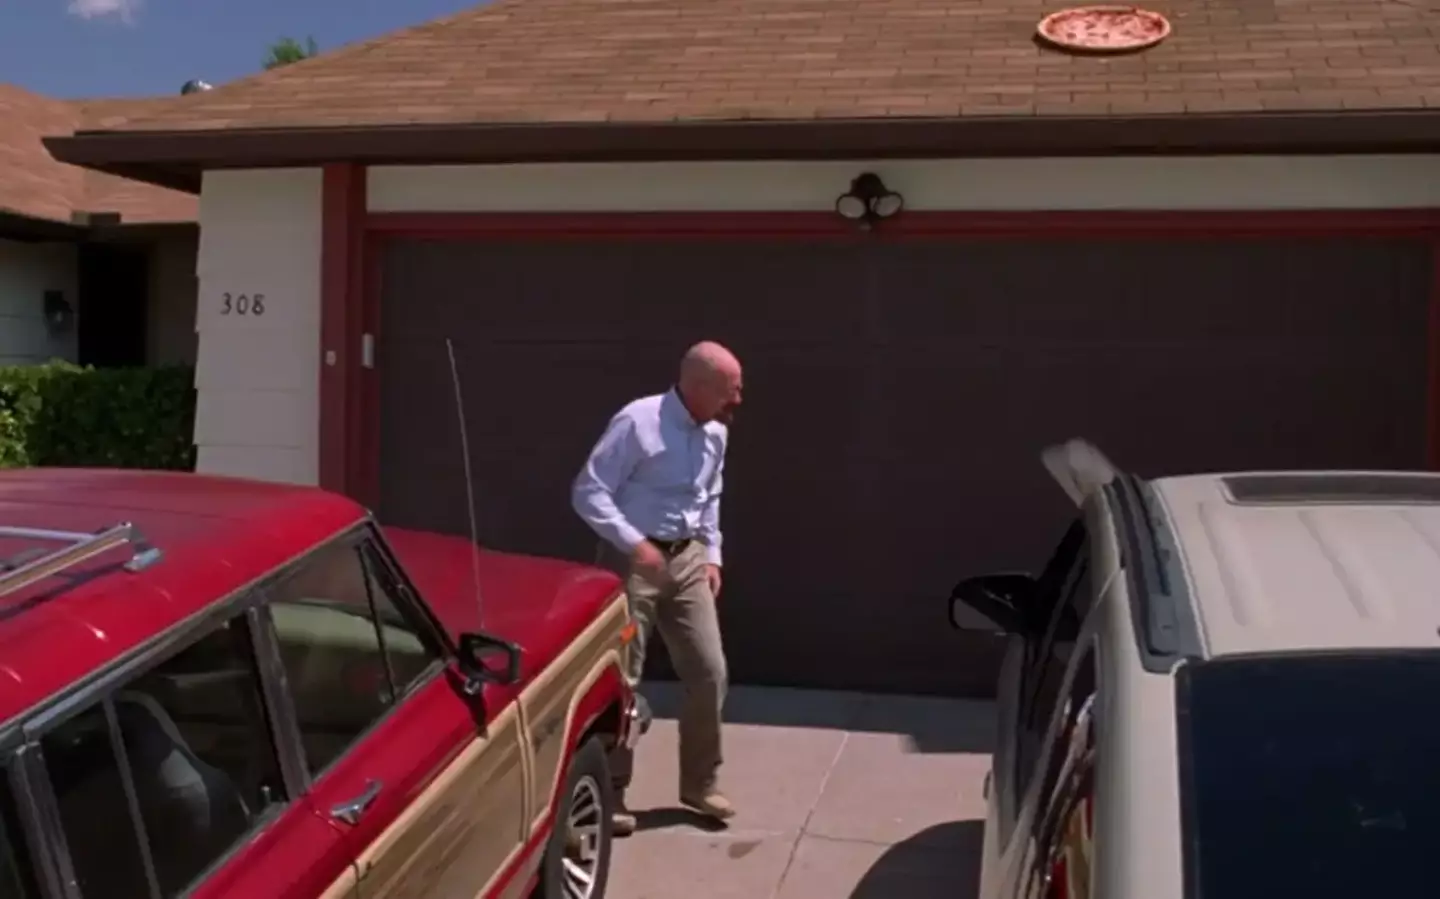 Bryan Cranston's Walter White outside the house.